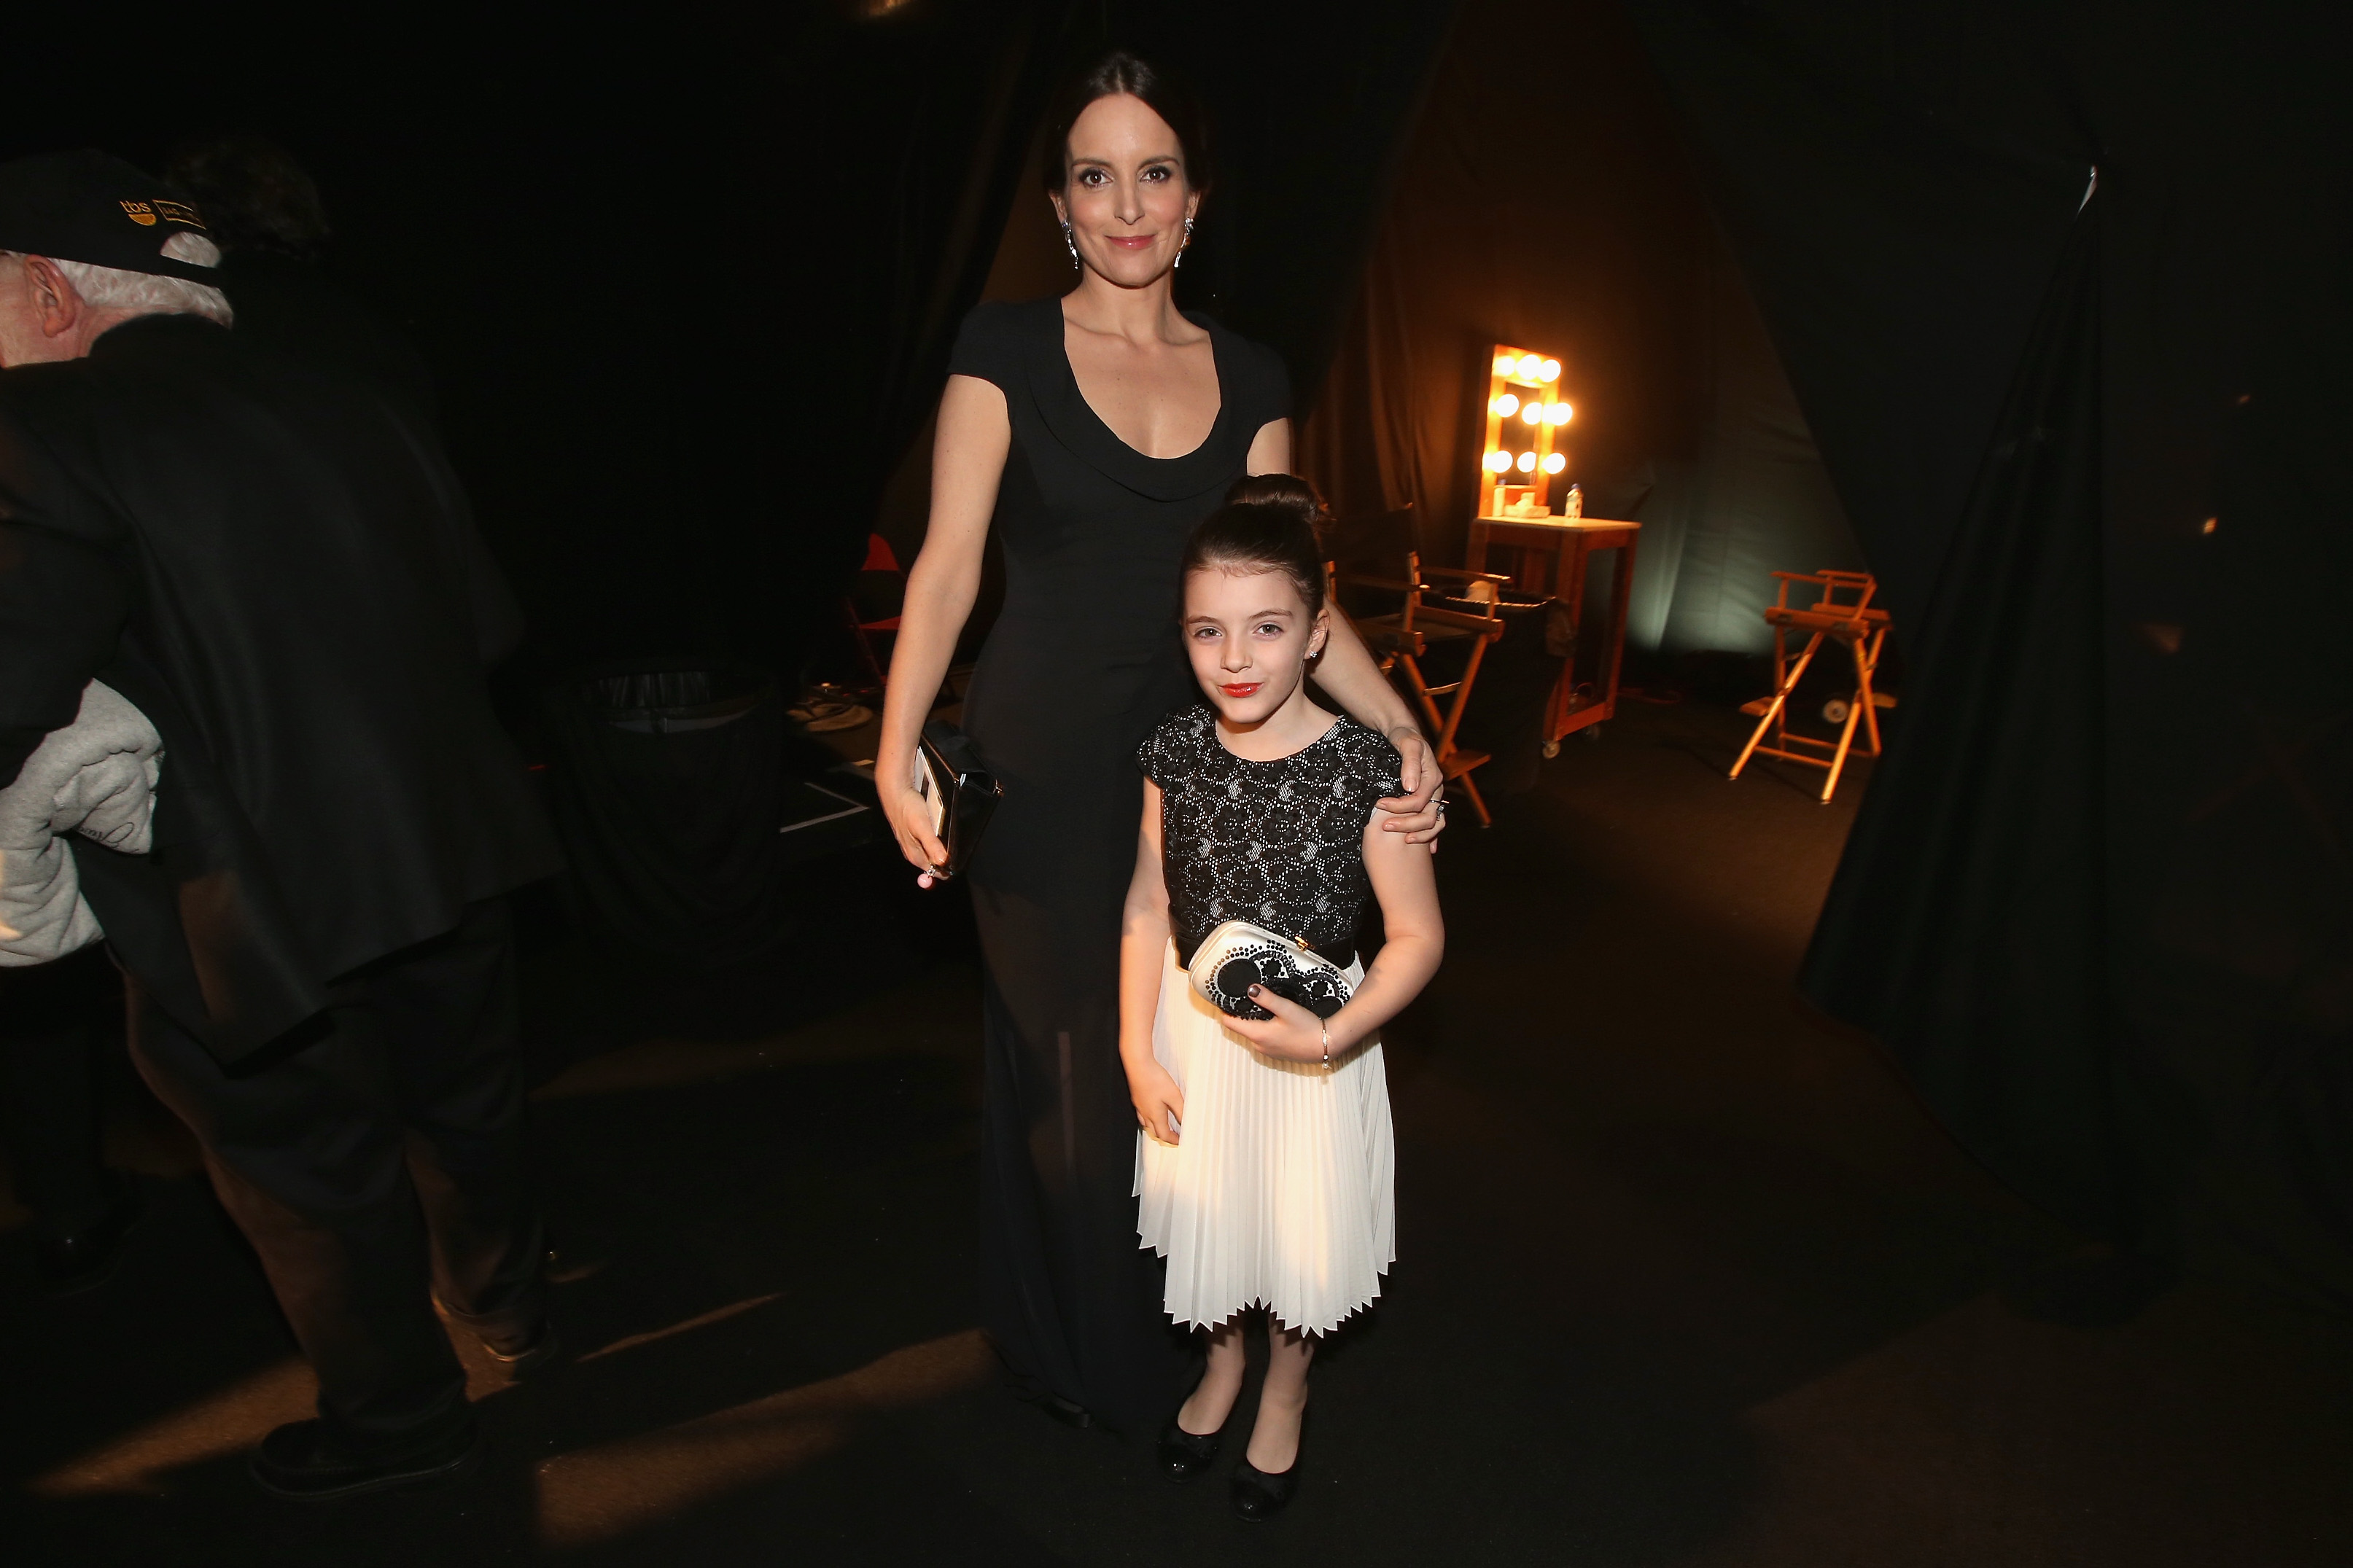 Tina Fey and her daughter Alice Zenobia Richmond attend the 20th Annual Screen Actors Guild Awards at The Shrine Auditorium on January 18, 2014, in Los Angeles, California. | Source: Getty Images